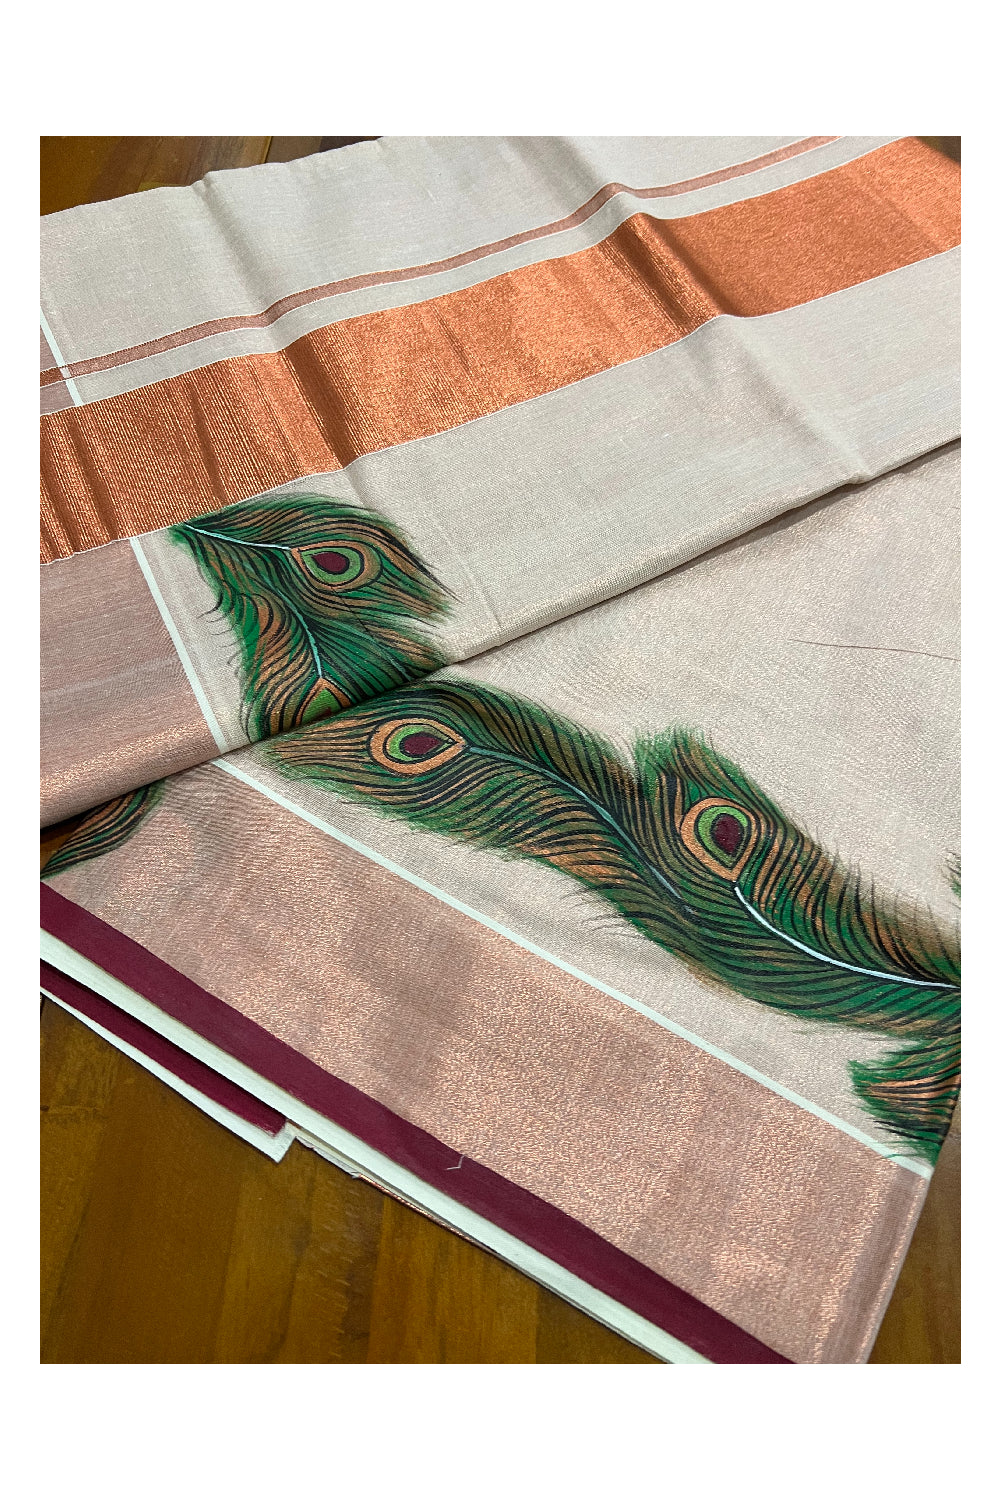 Southloom Onam 2022 Copper Tissue Kasavu Saree with Hand Painted Mural Artwork